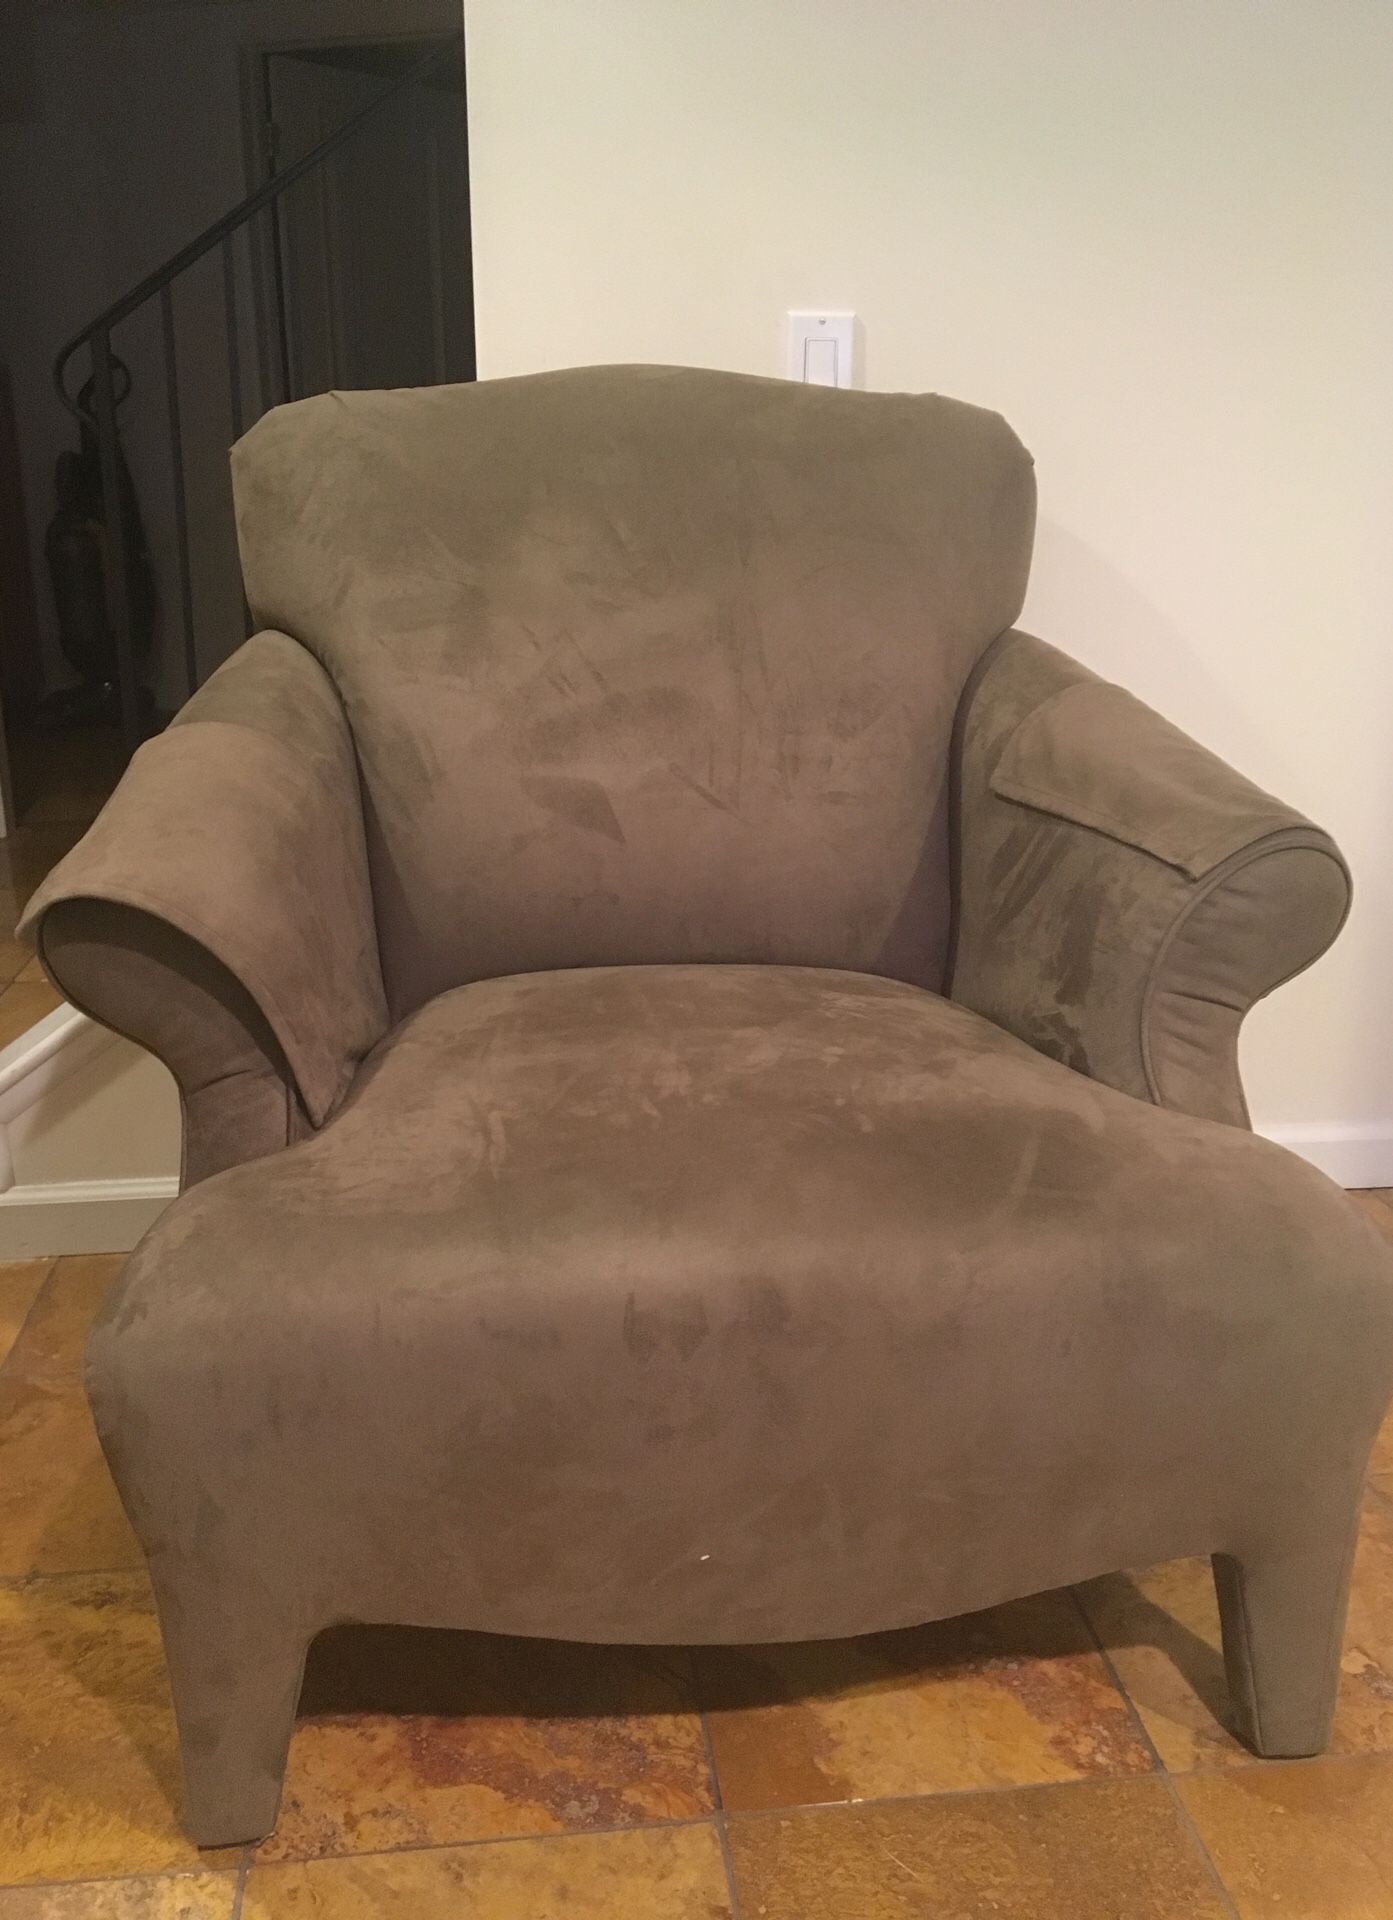 Easy chair-Very good condition and comfortable